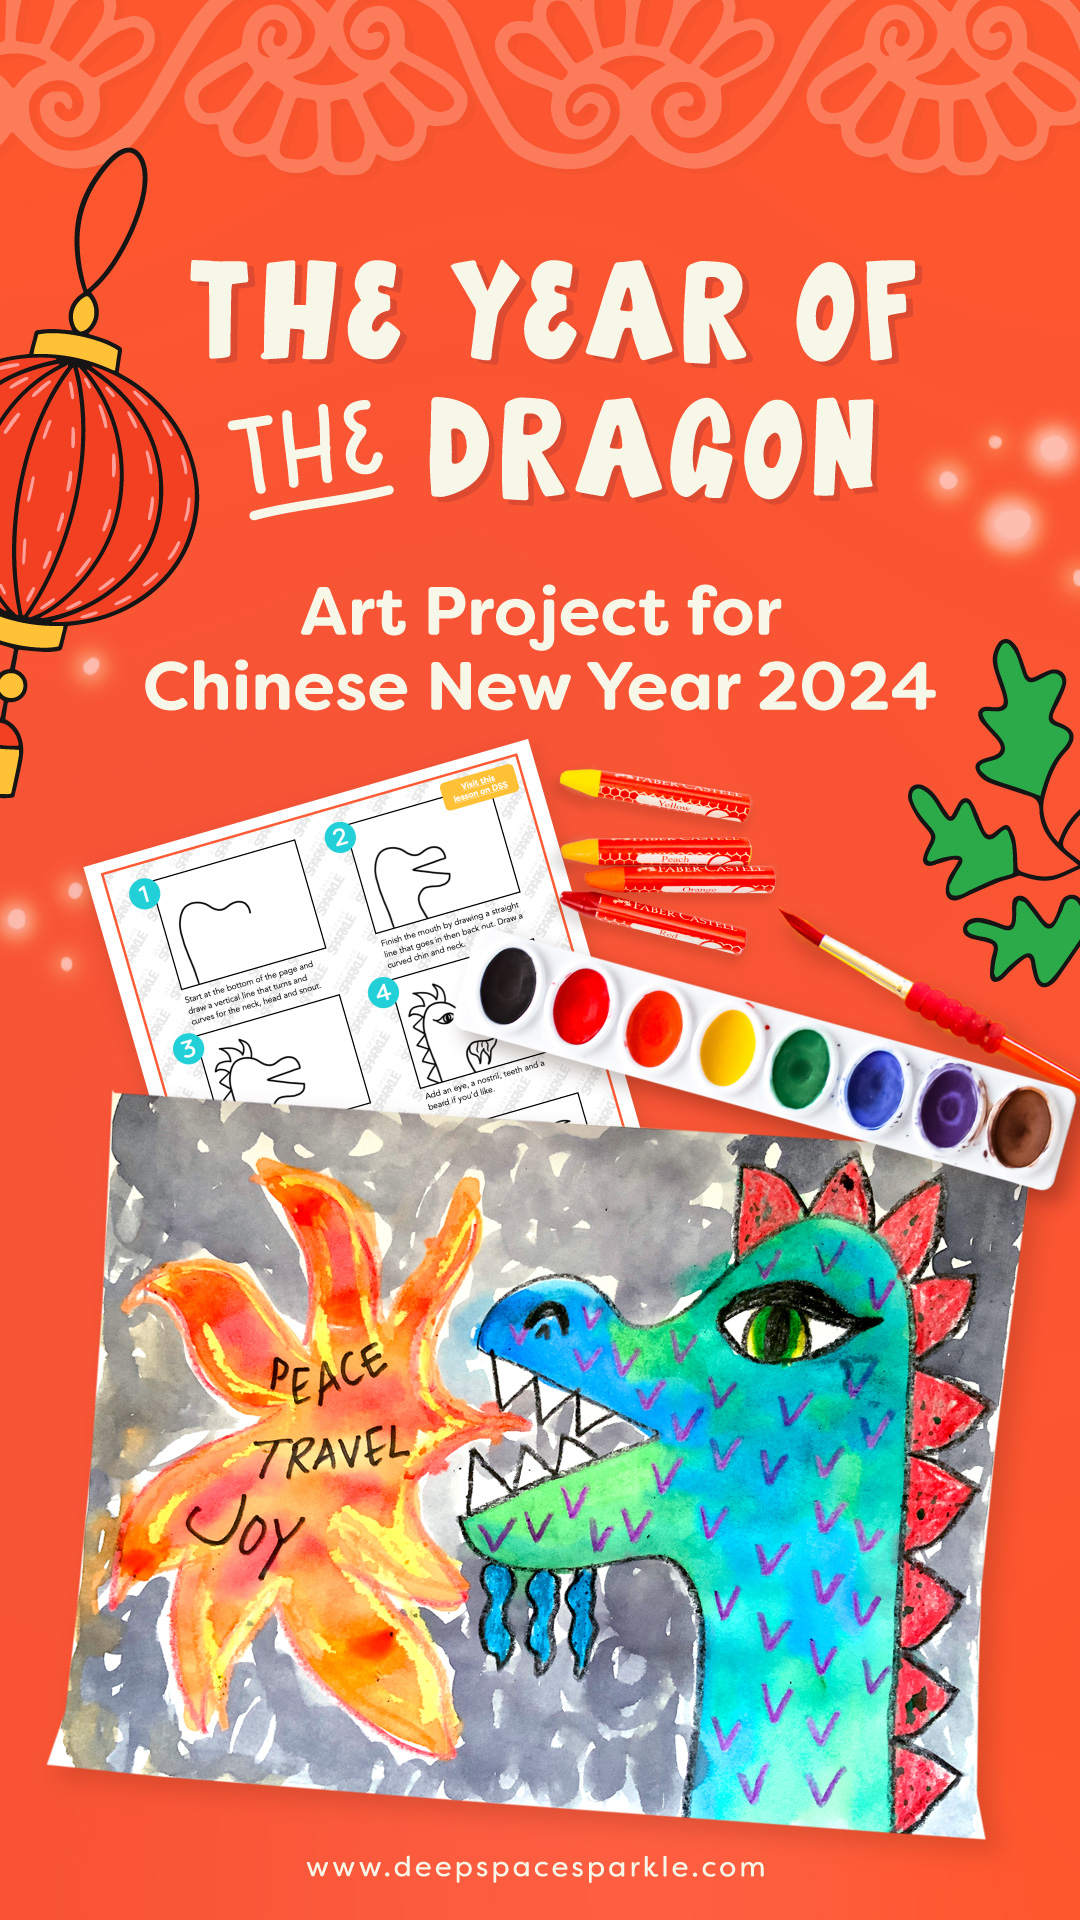 The Year of the Dragon Art Project for the Chinese New Year 2024